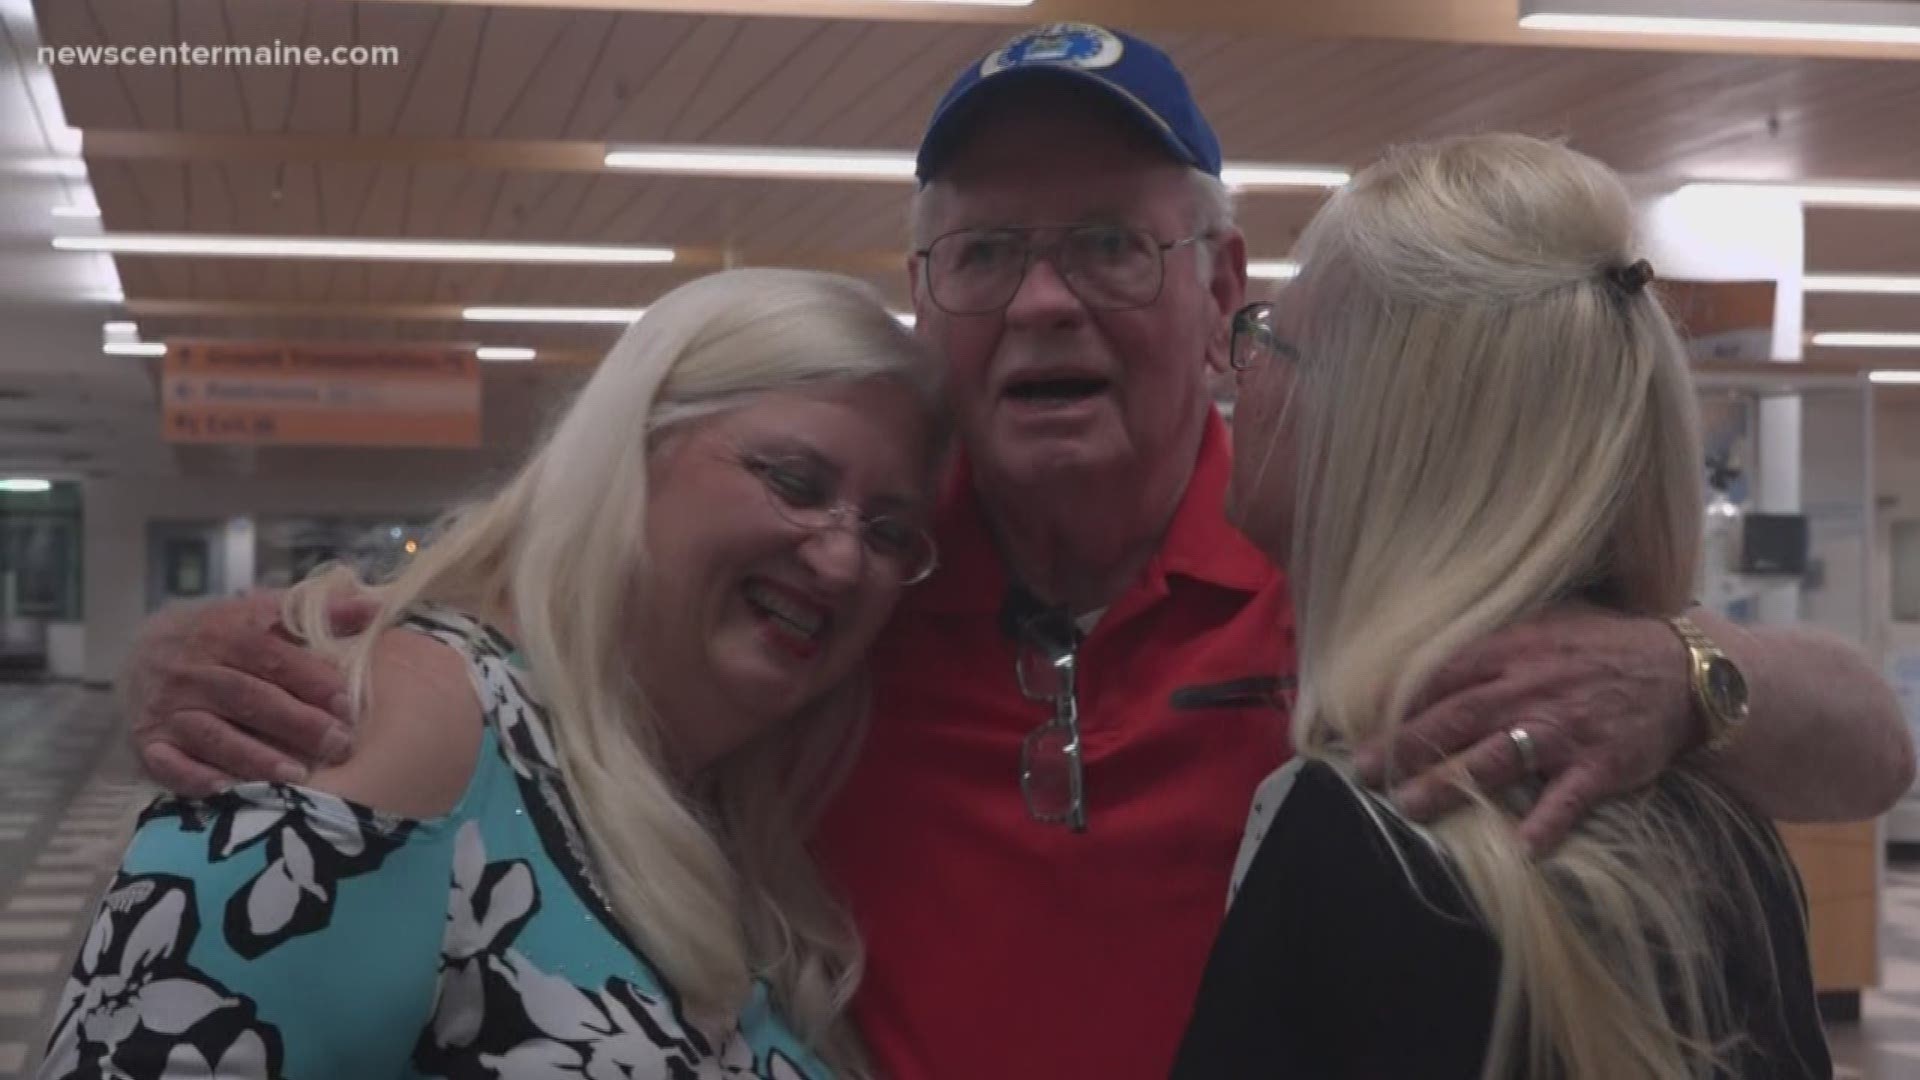 Father meets daughter, sister meets sister in double family reunion